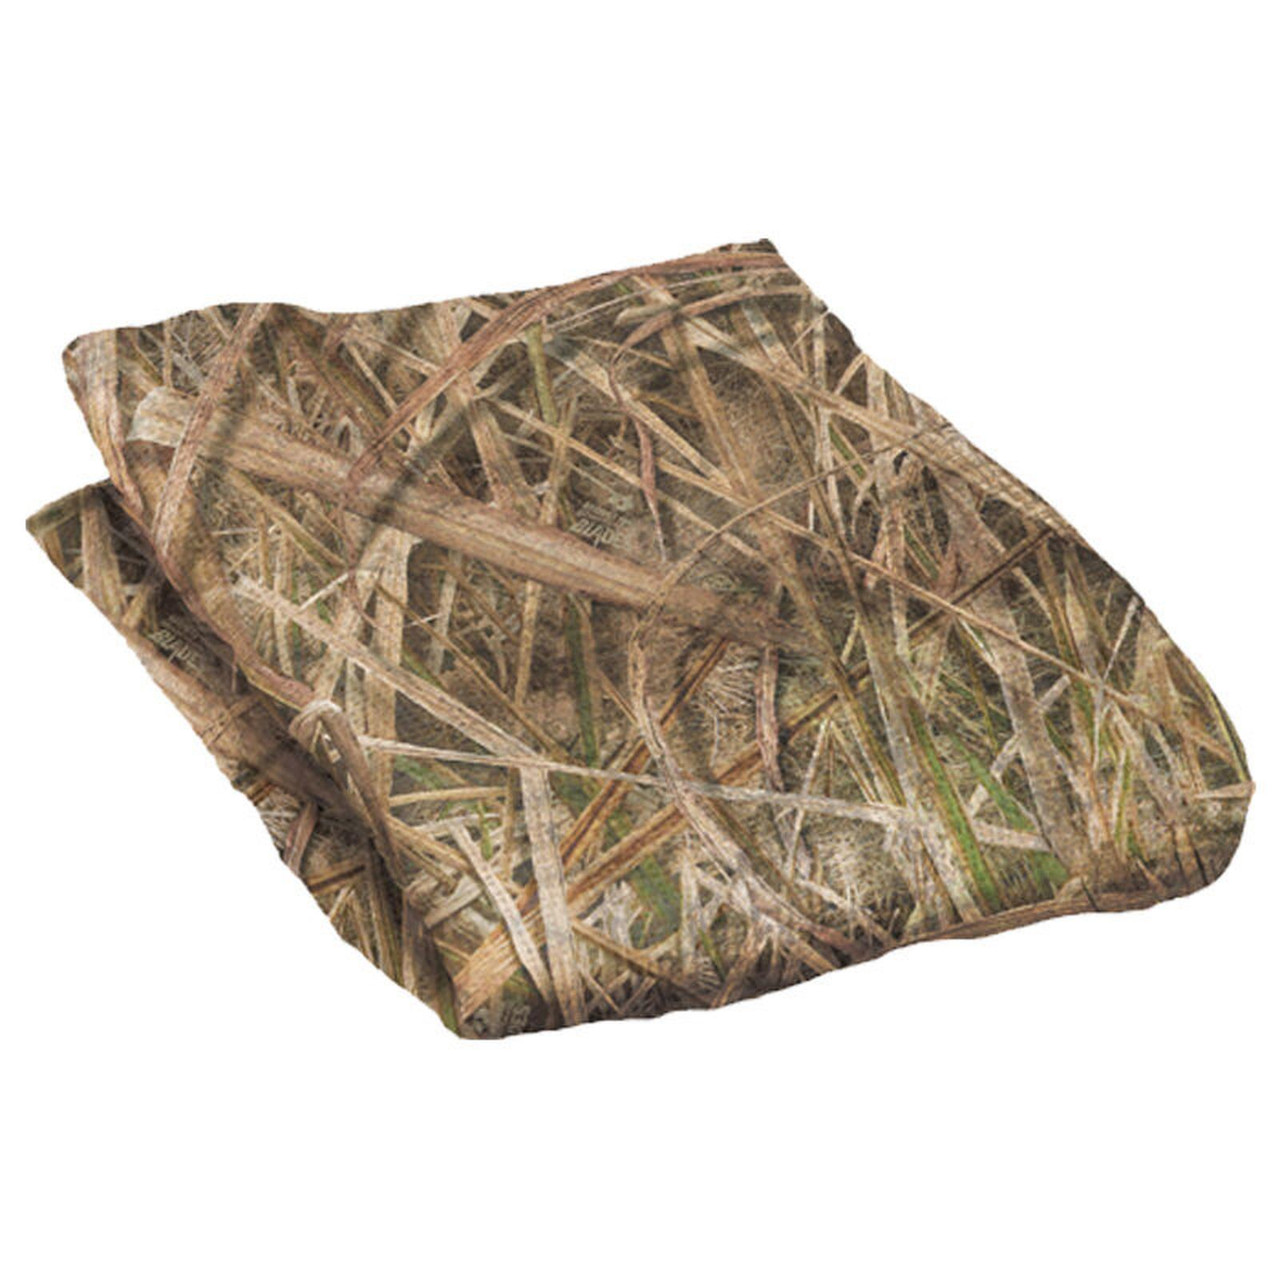 Mossy Oak Camo Burlap Camouflage Blind by Break-up Country 12ft X 54in for sale online 